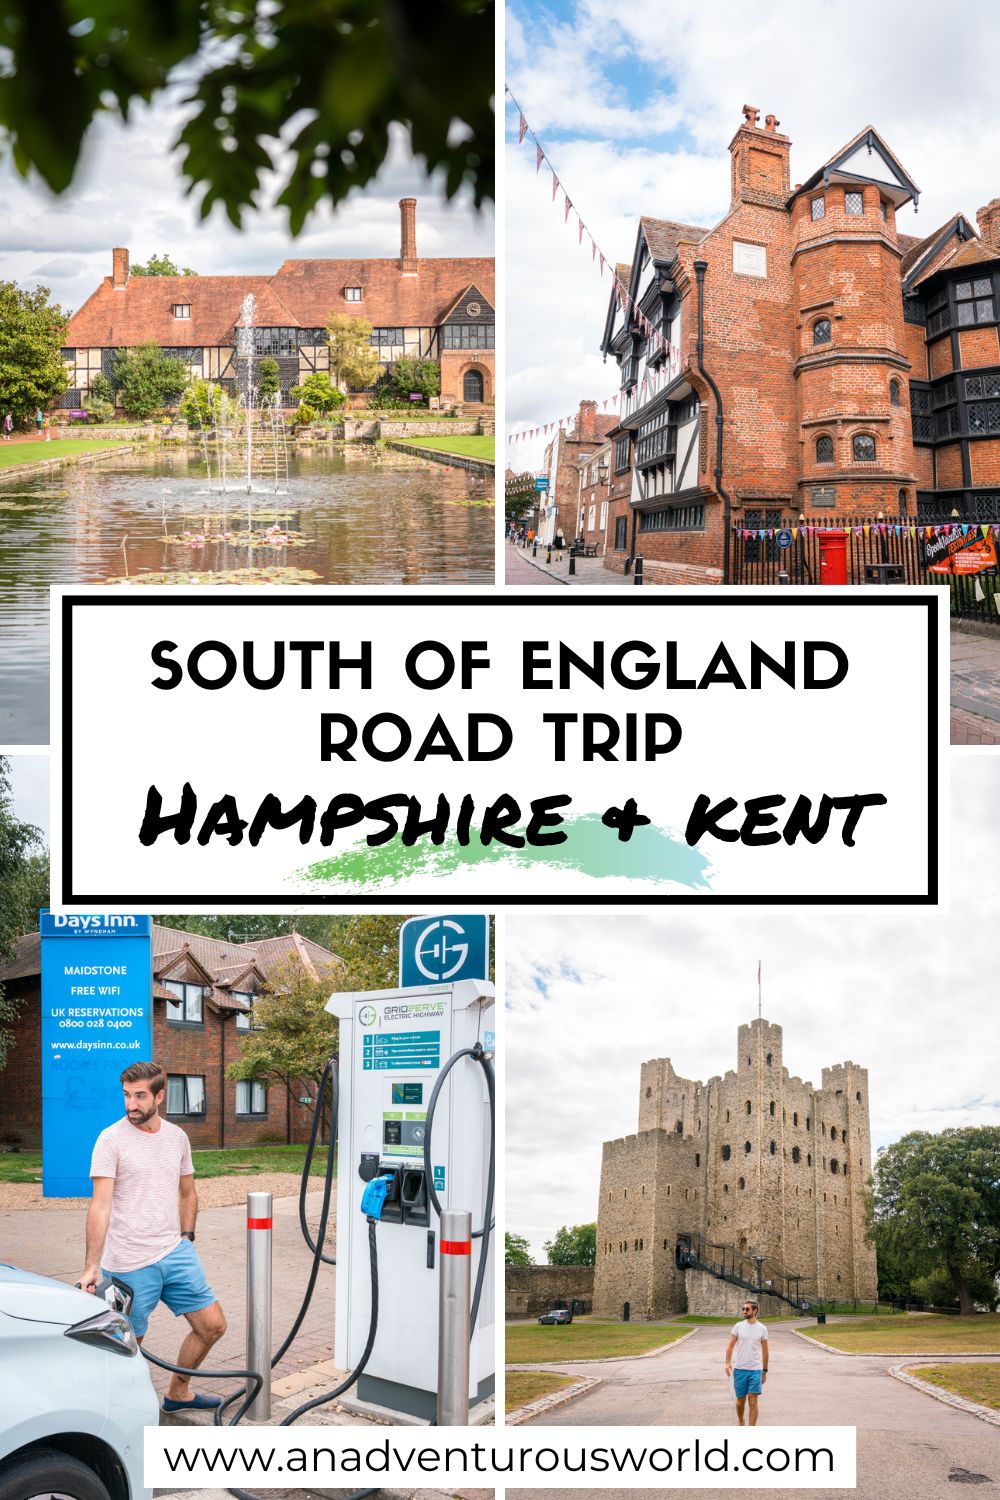 South of England Road Trip: Hampshire & Kent